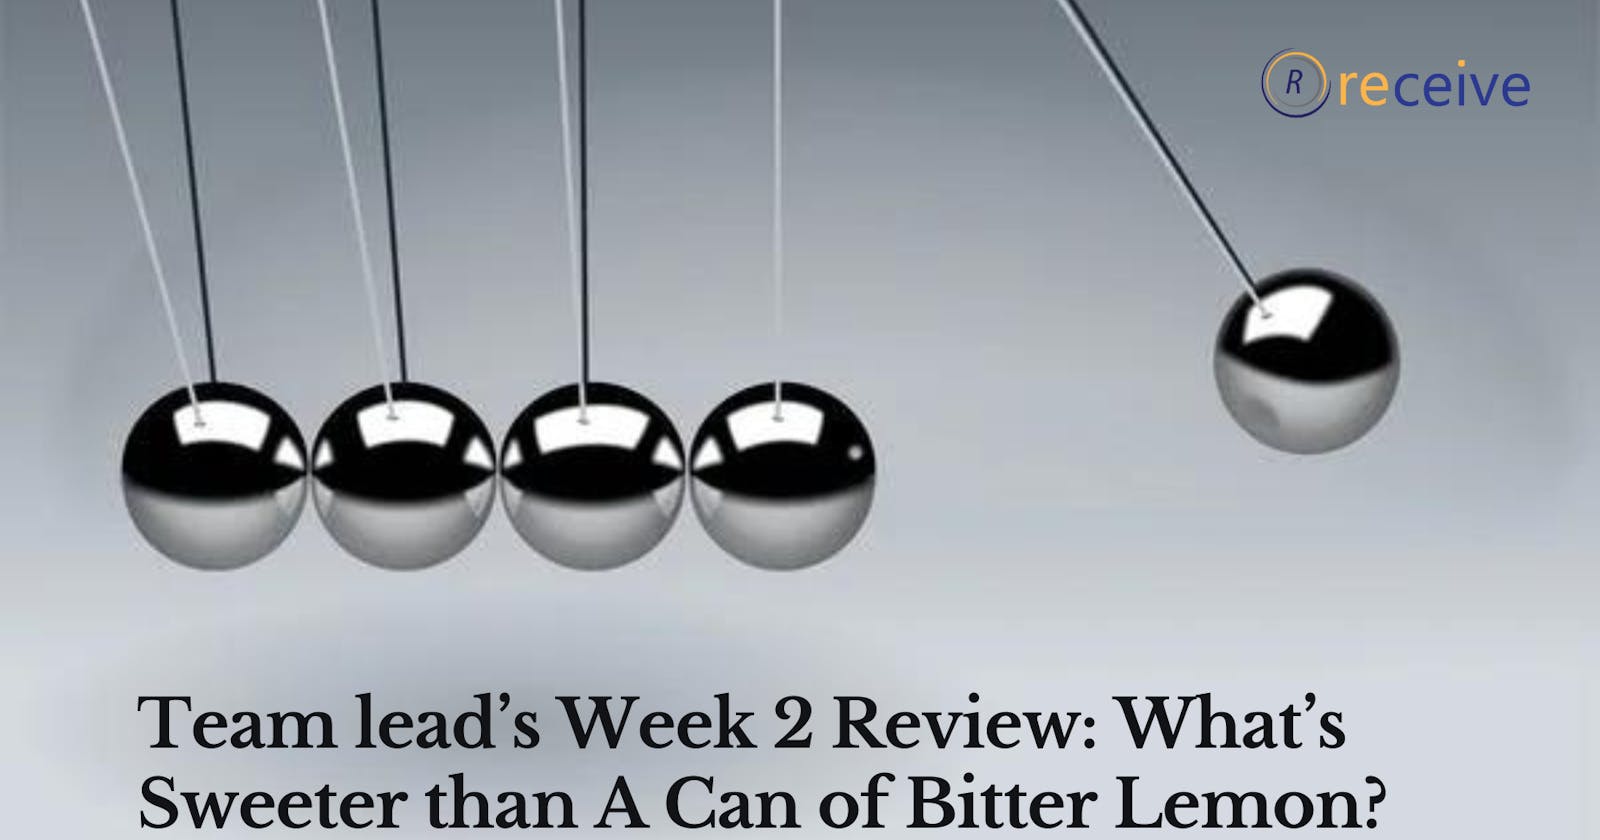 Team lead’s Week 2 Review: What’s Sweeter than A Can of Bitter Lemon?